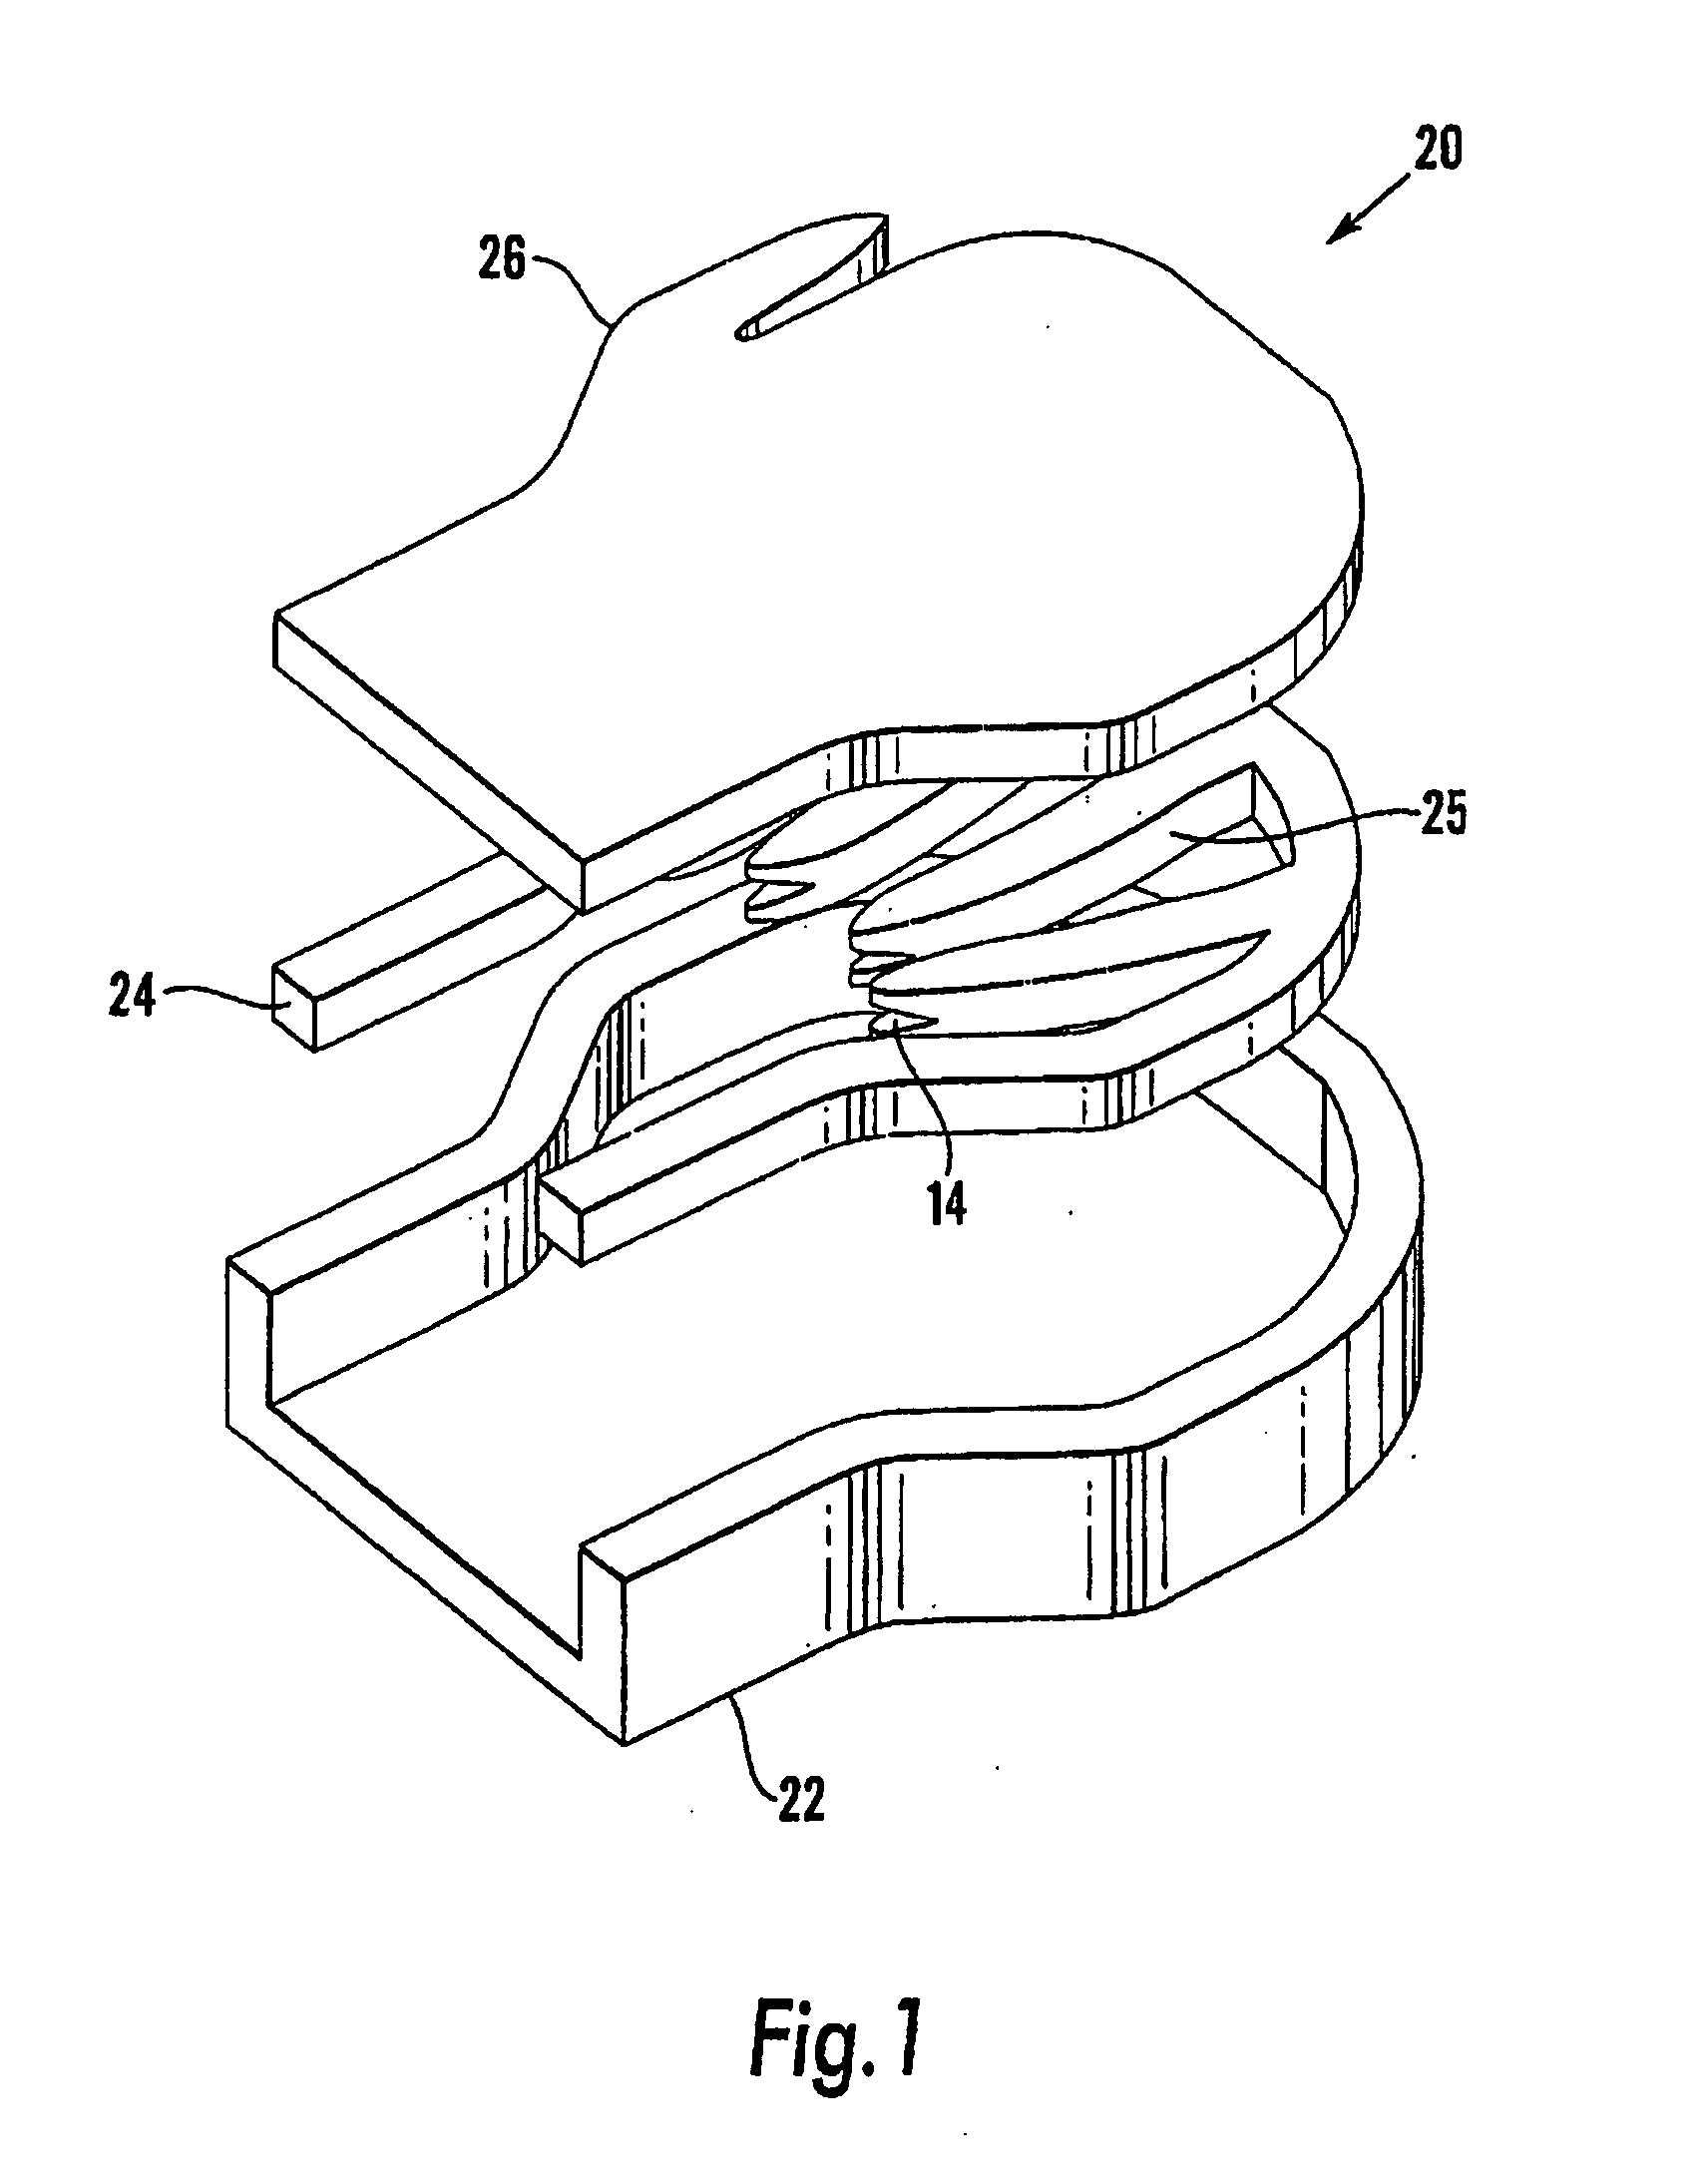 Wound treatment apparatus employing reduced pressure